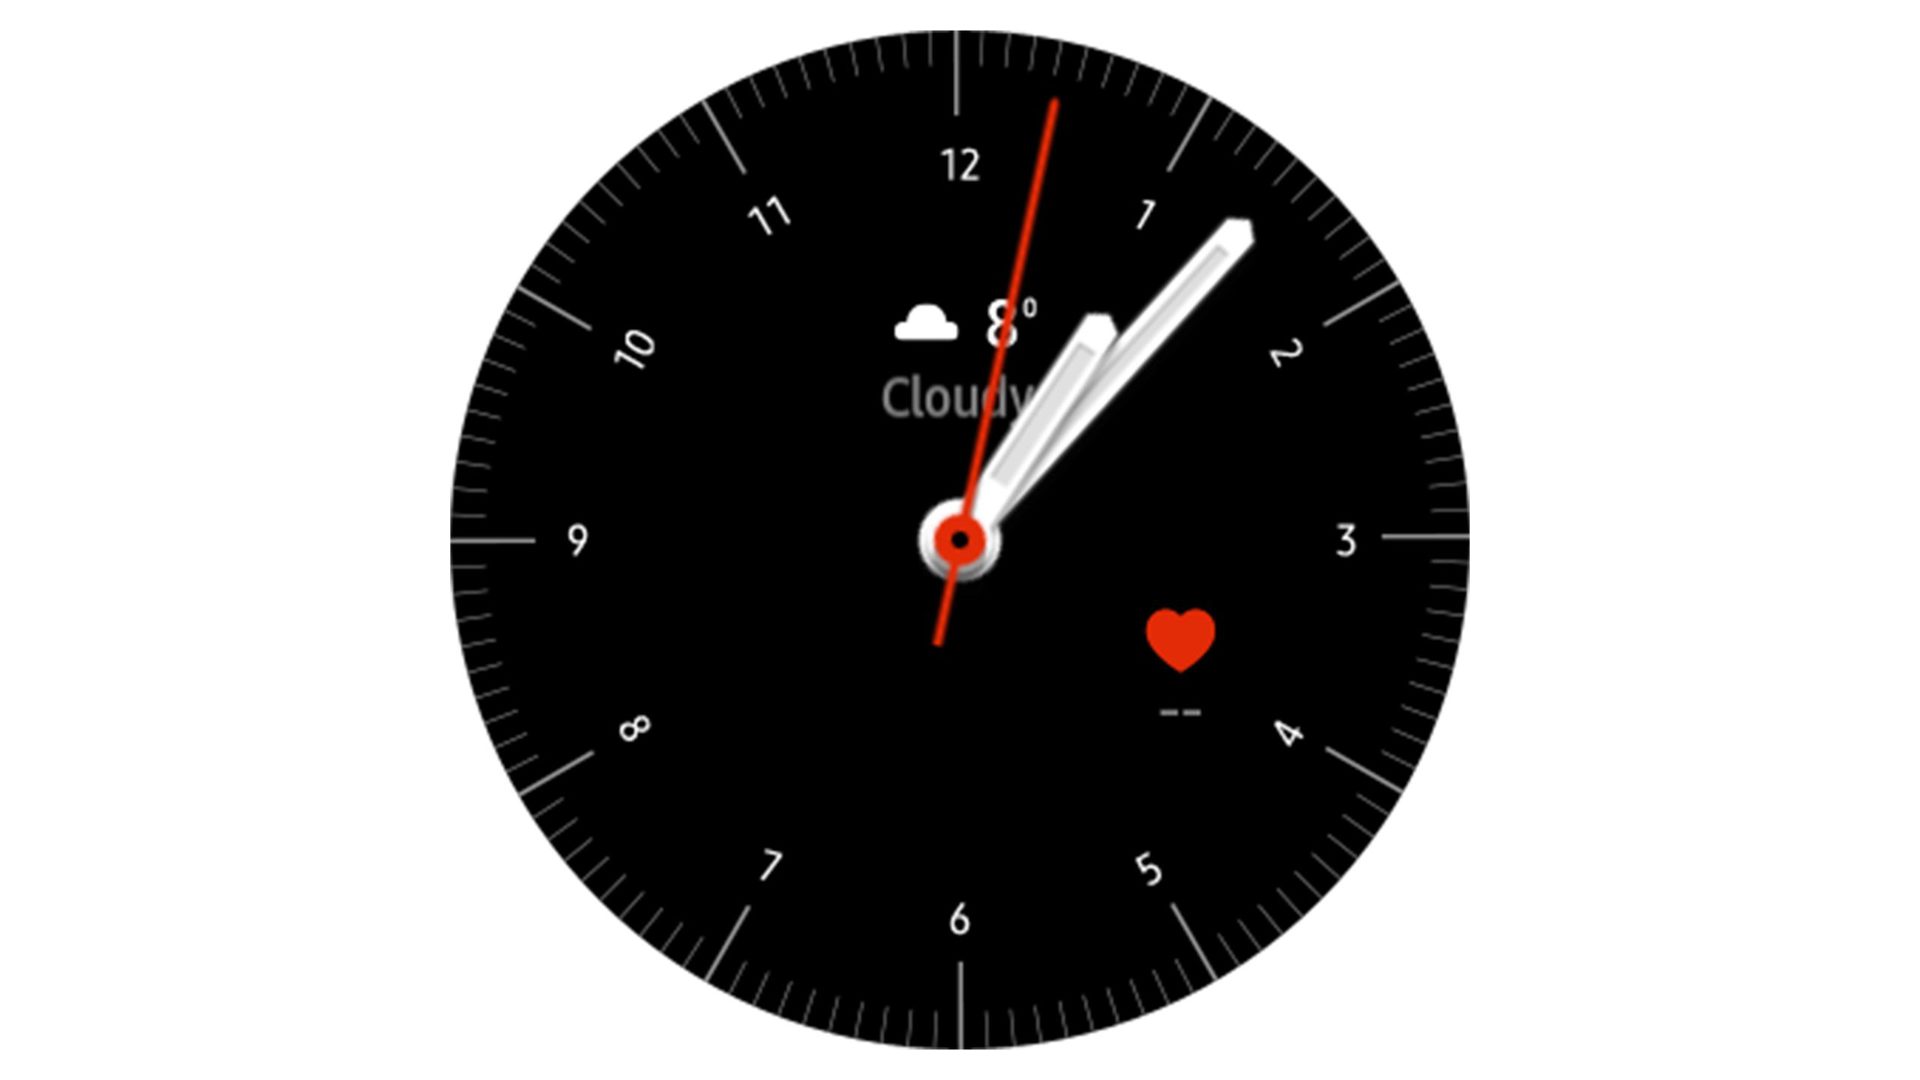 The Tizen watch face Simple Analog is a straightforward clock face with one customizable complication.